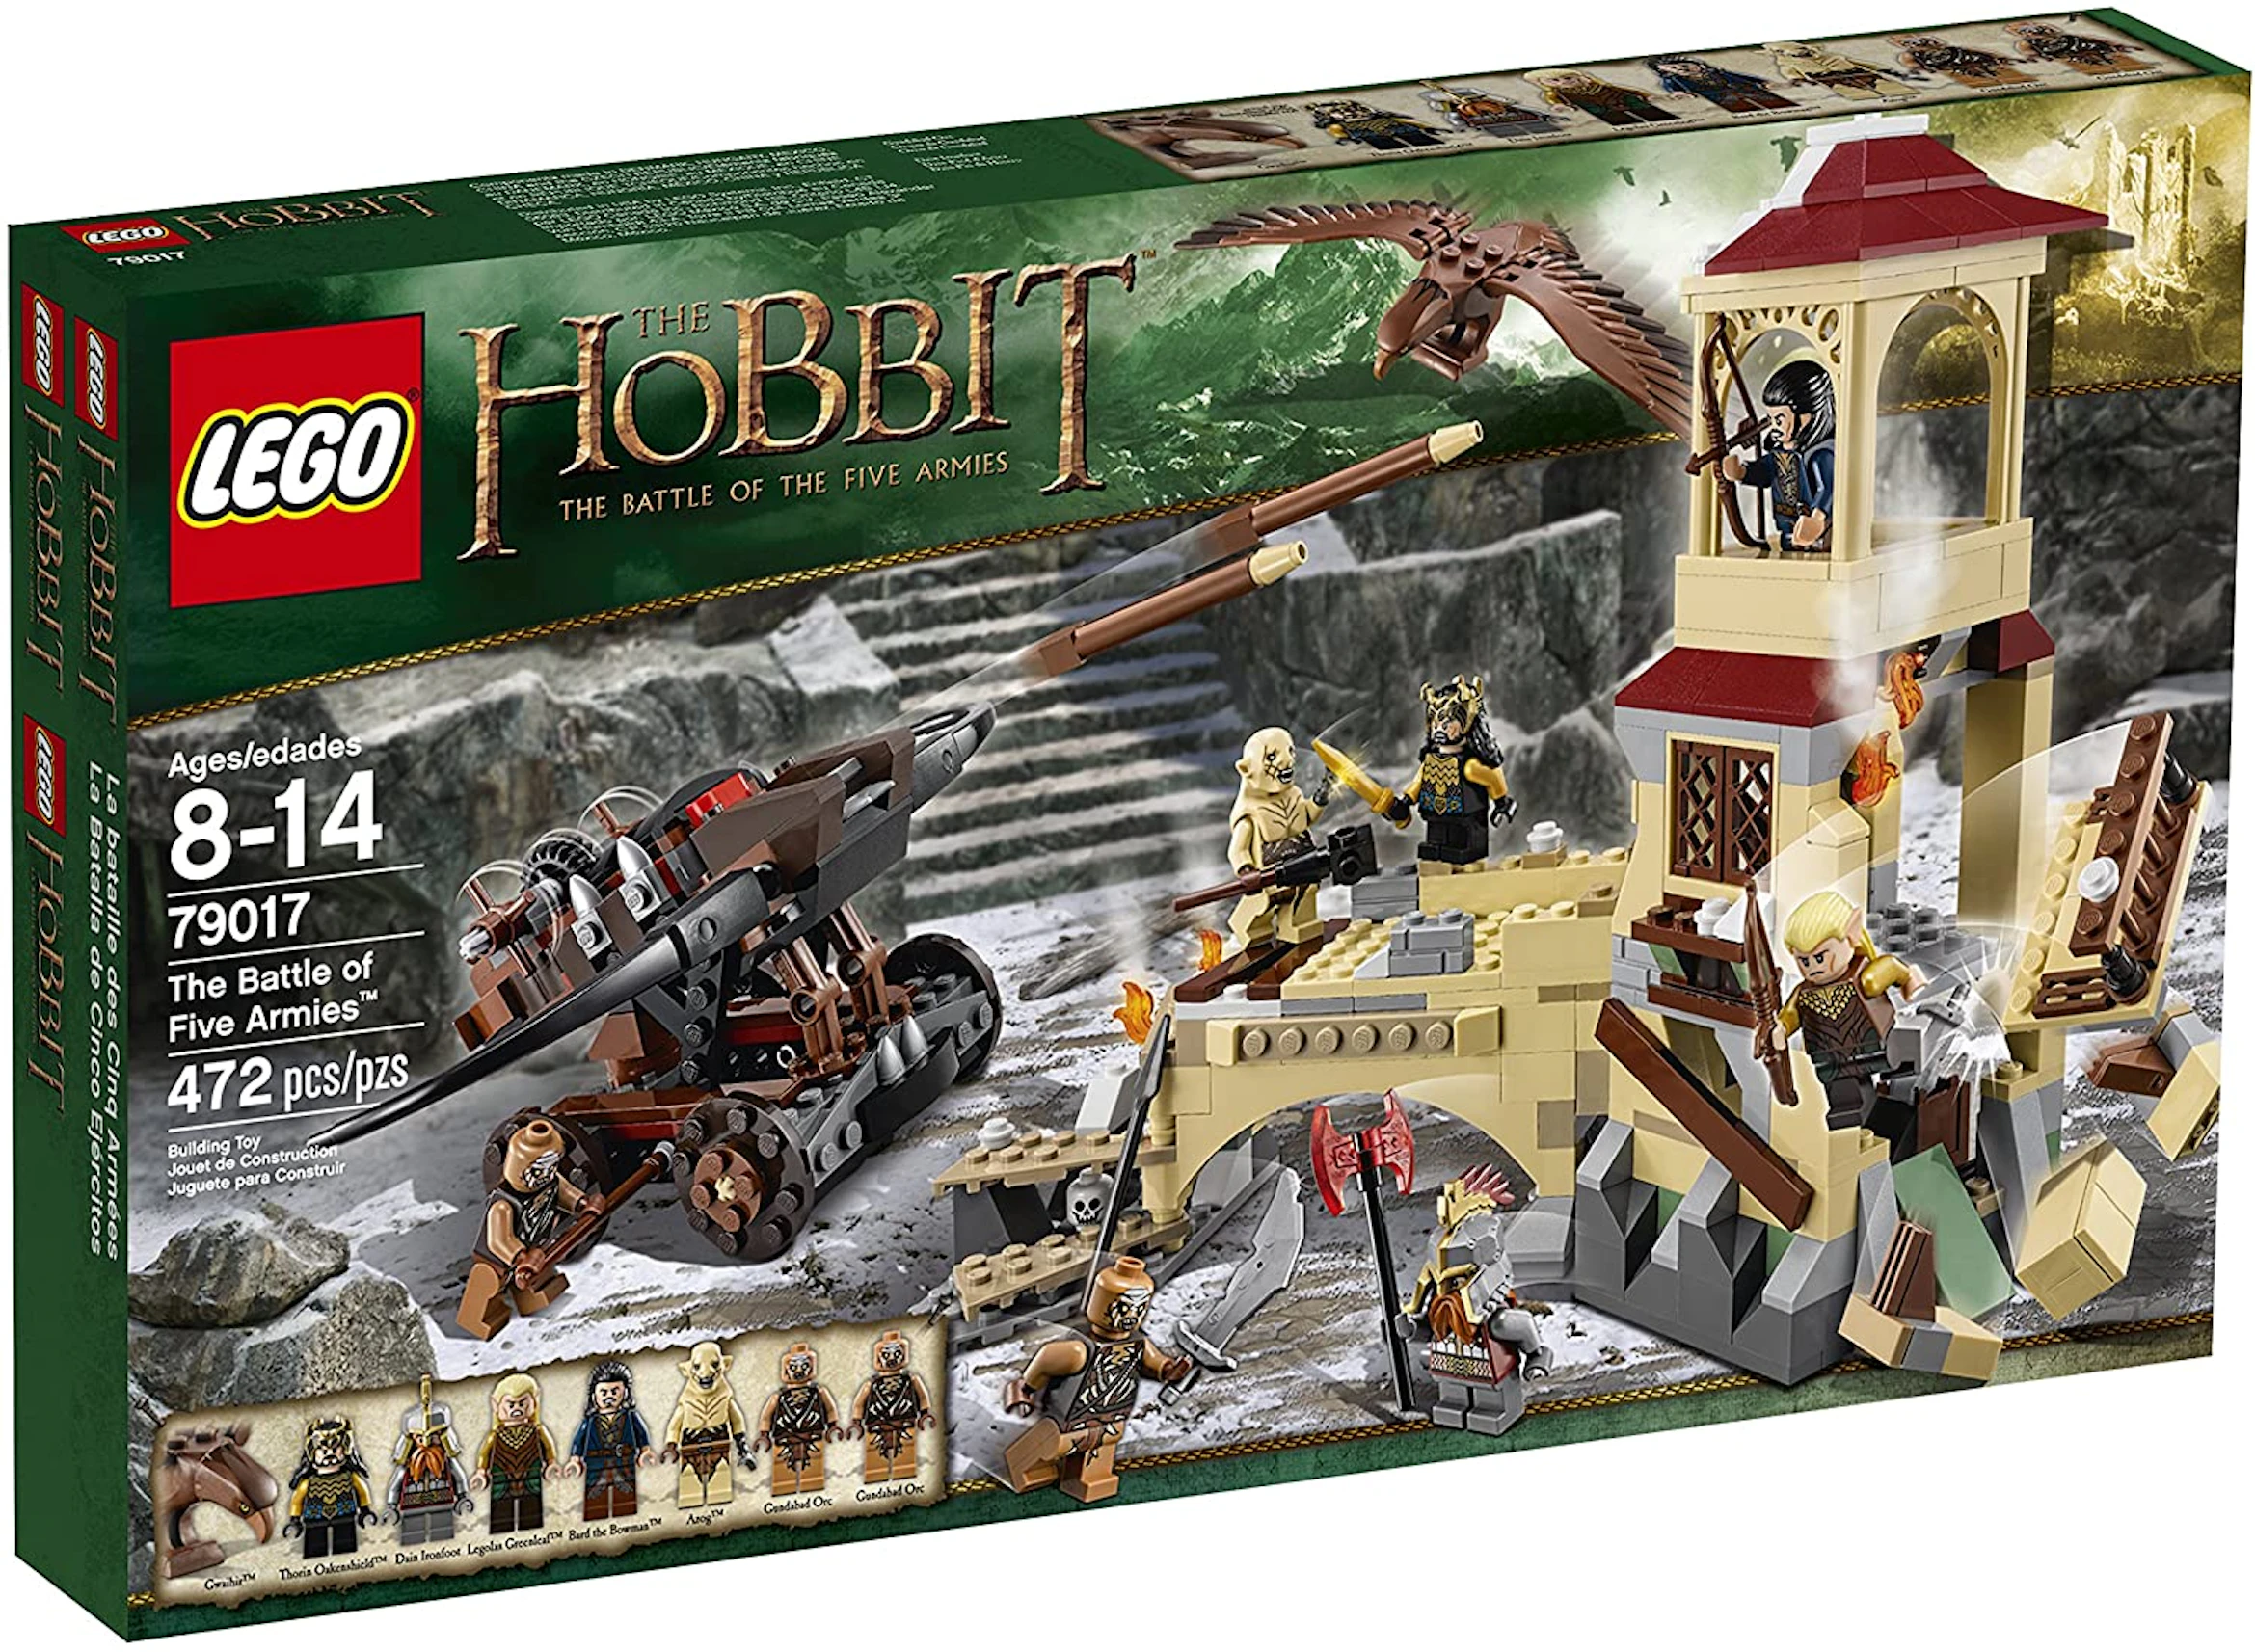 Lego Lord Of The Rings And The Hobbit | lupon.gov.ph